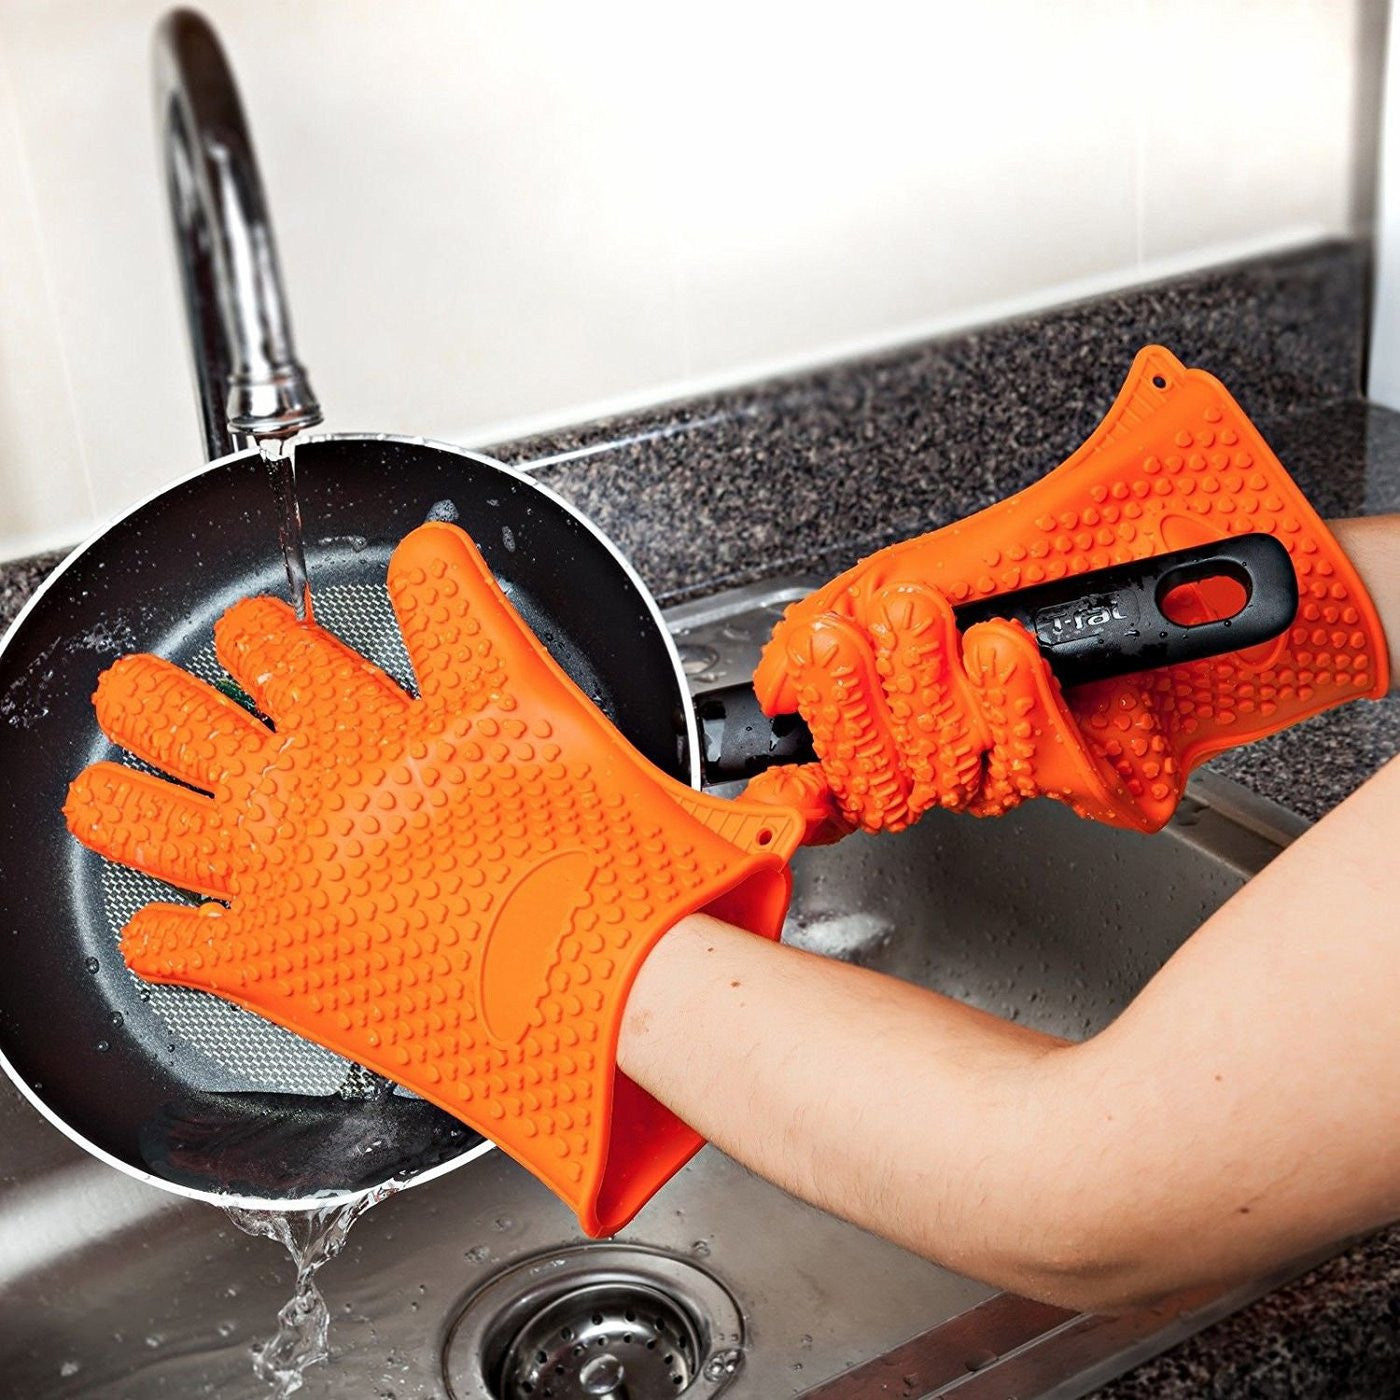 Silicone Heat Resistant Gloves